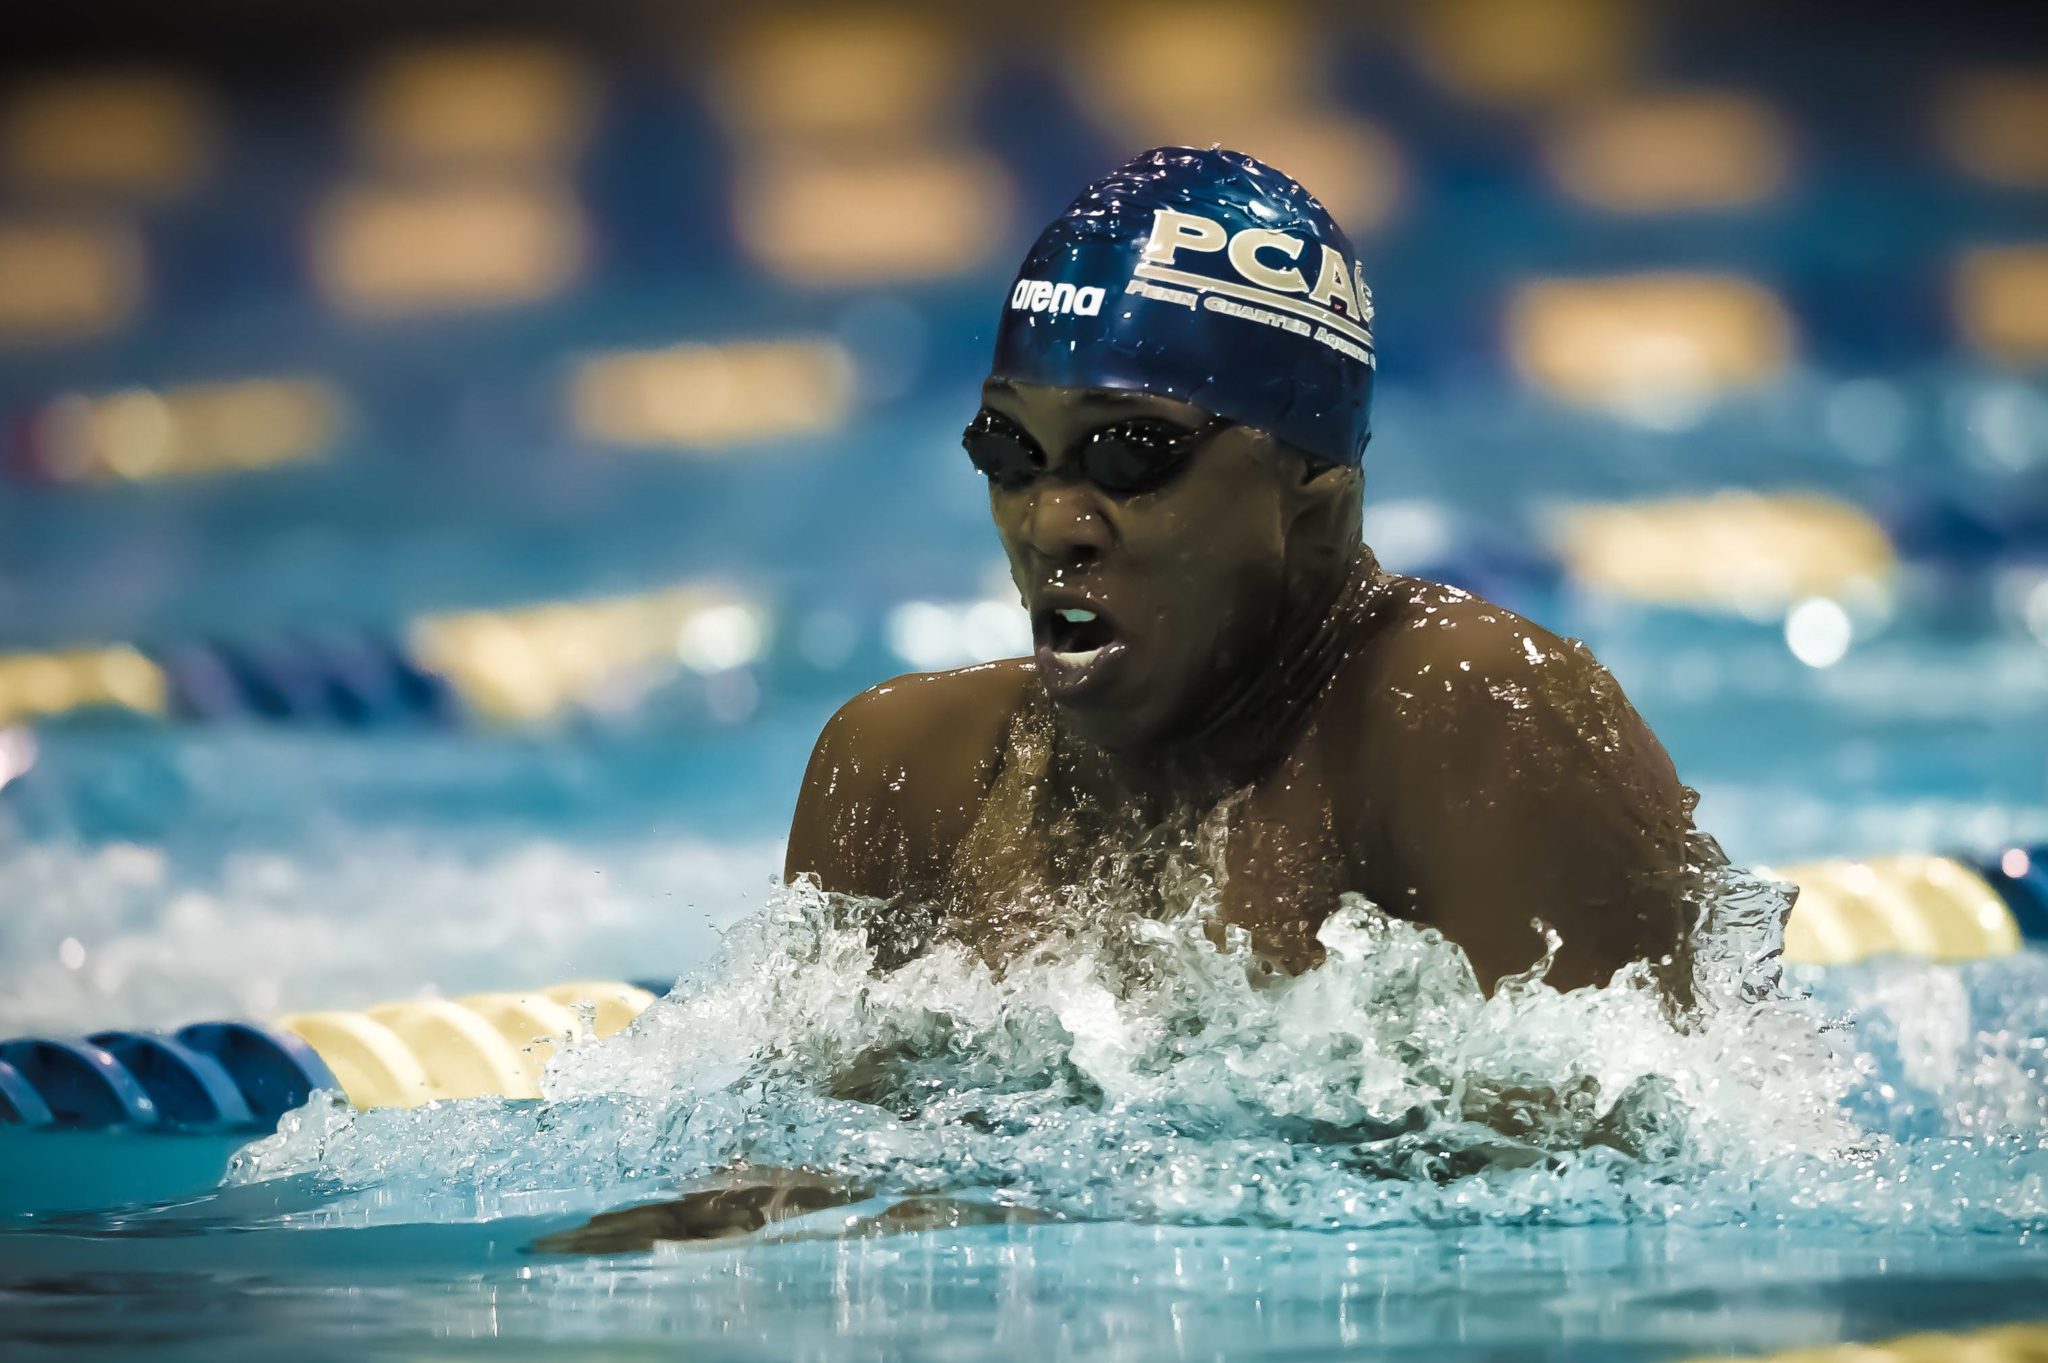 Top 20 NCAA Swimming Recruits In The Boys High School Class of 2018